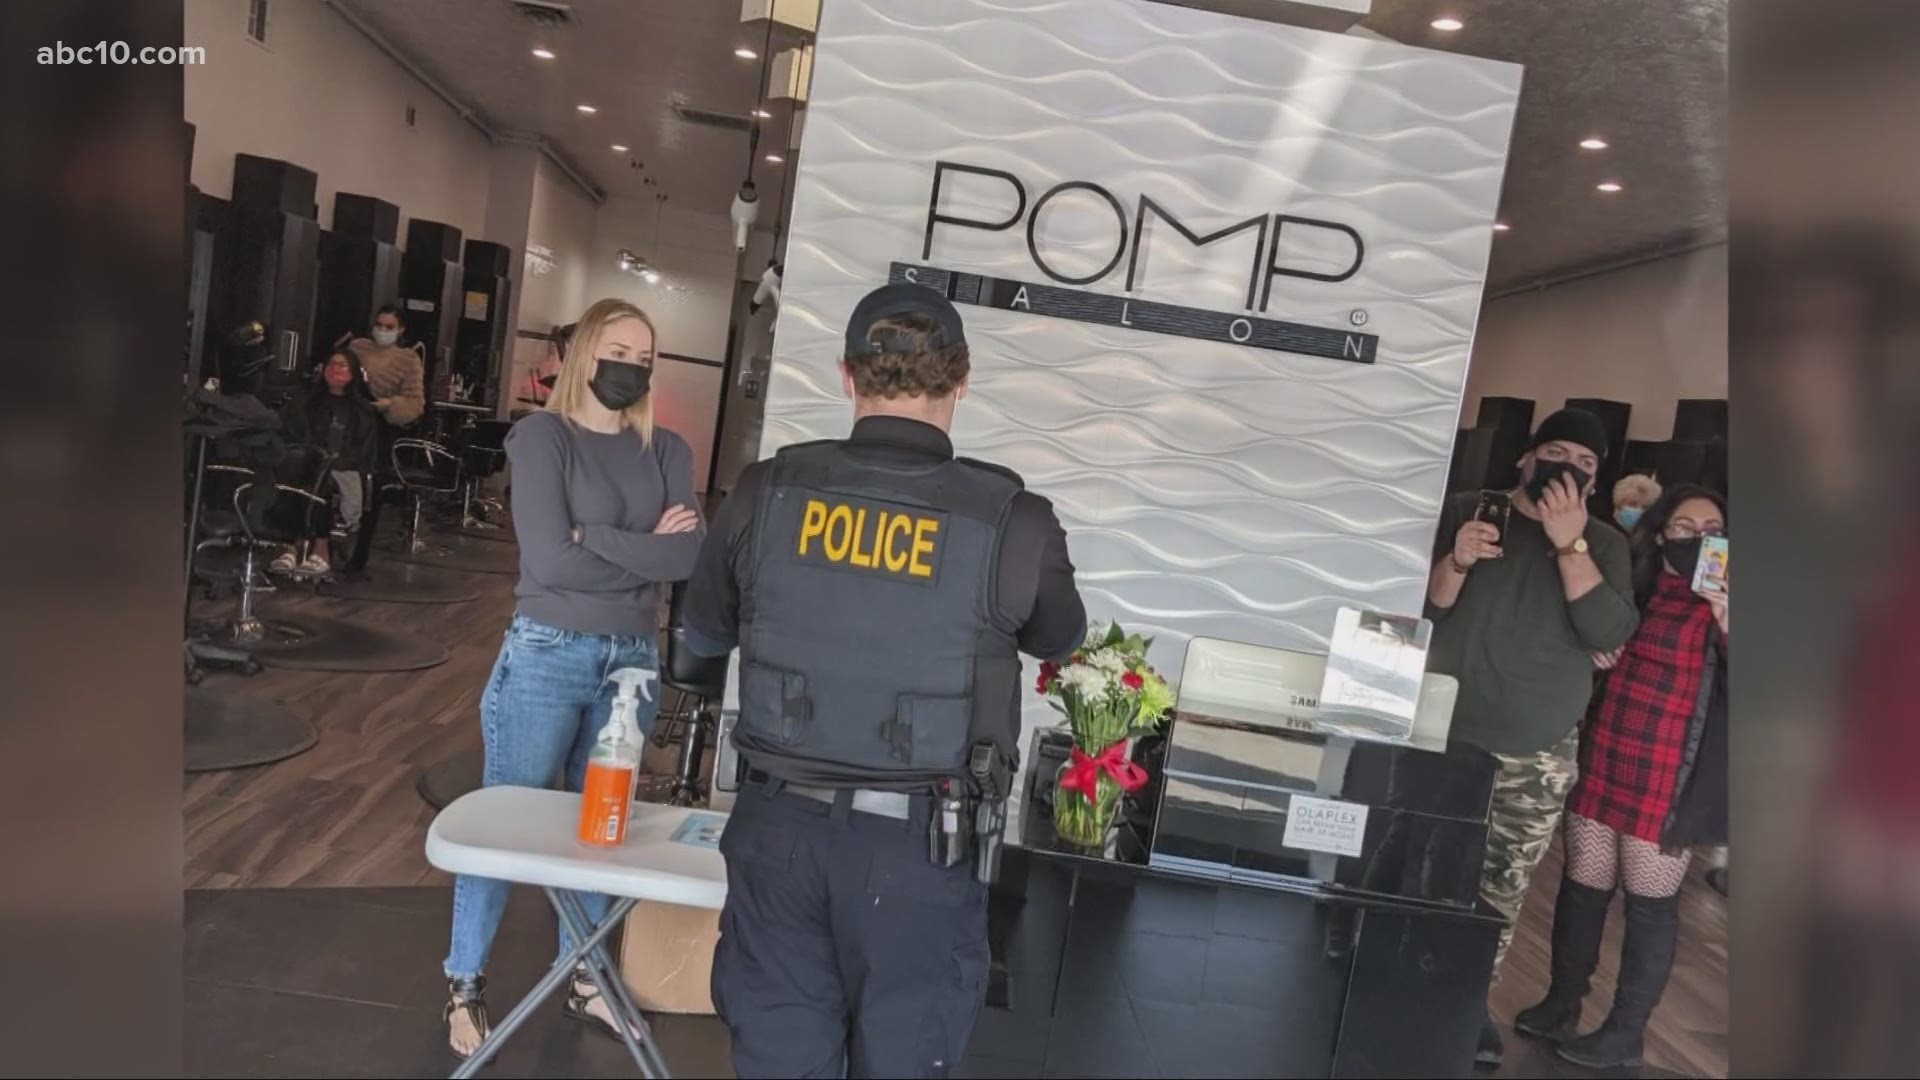 California Department of Consumer Affairs officers shut down Pomp Salon in North Stockton on Wednesday for defying the state's stay-at-home orders.